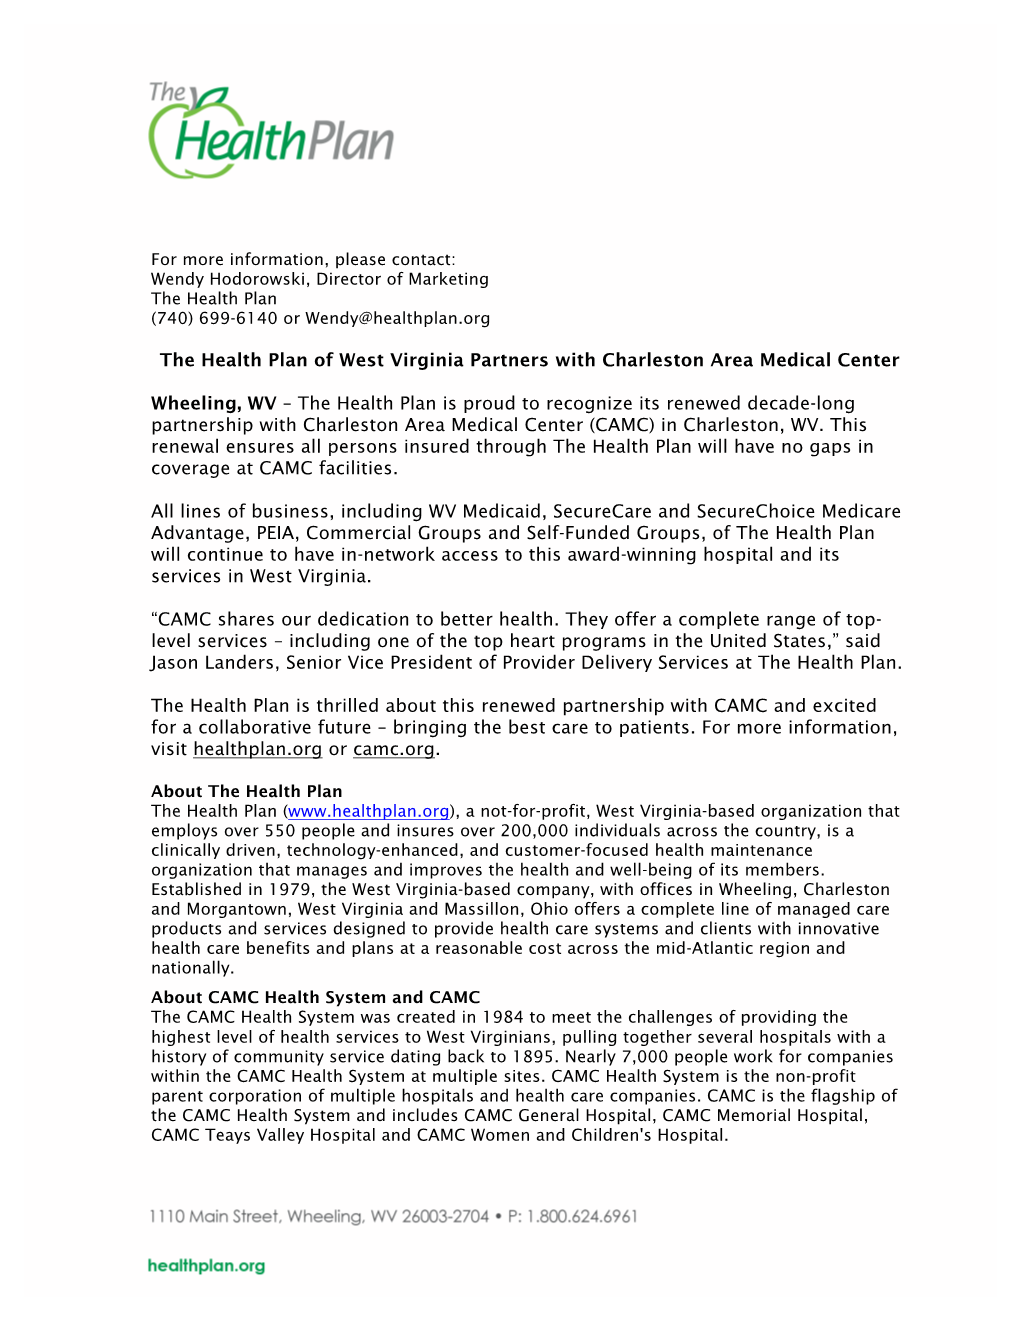 The Health Plan of West Virginia Partners with Charleston Area Medical Center Wheeling, WV – the Health Plan Is Proud to Recog